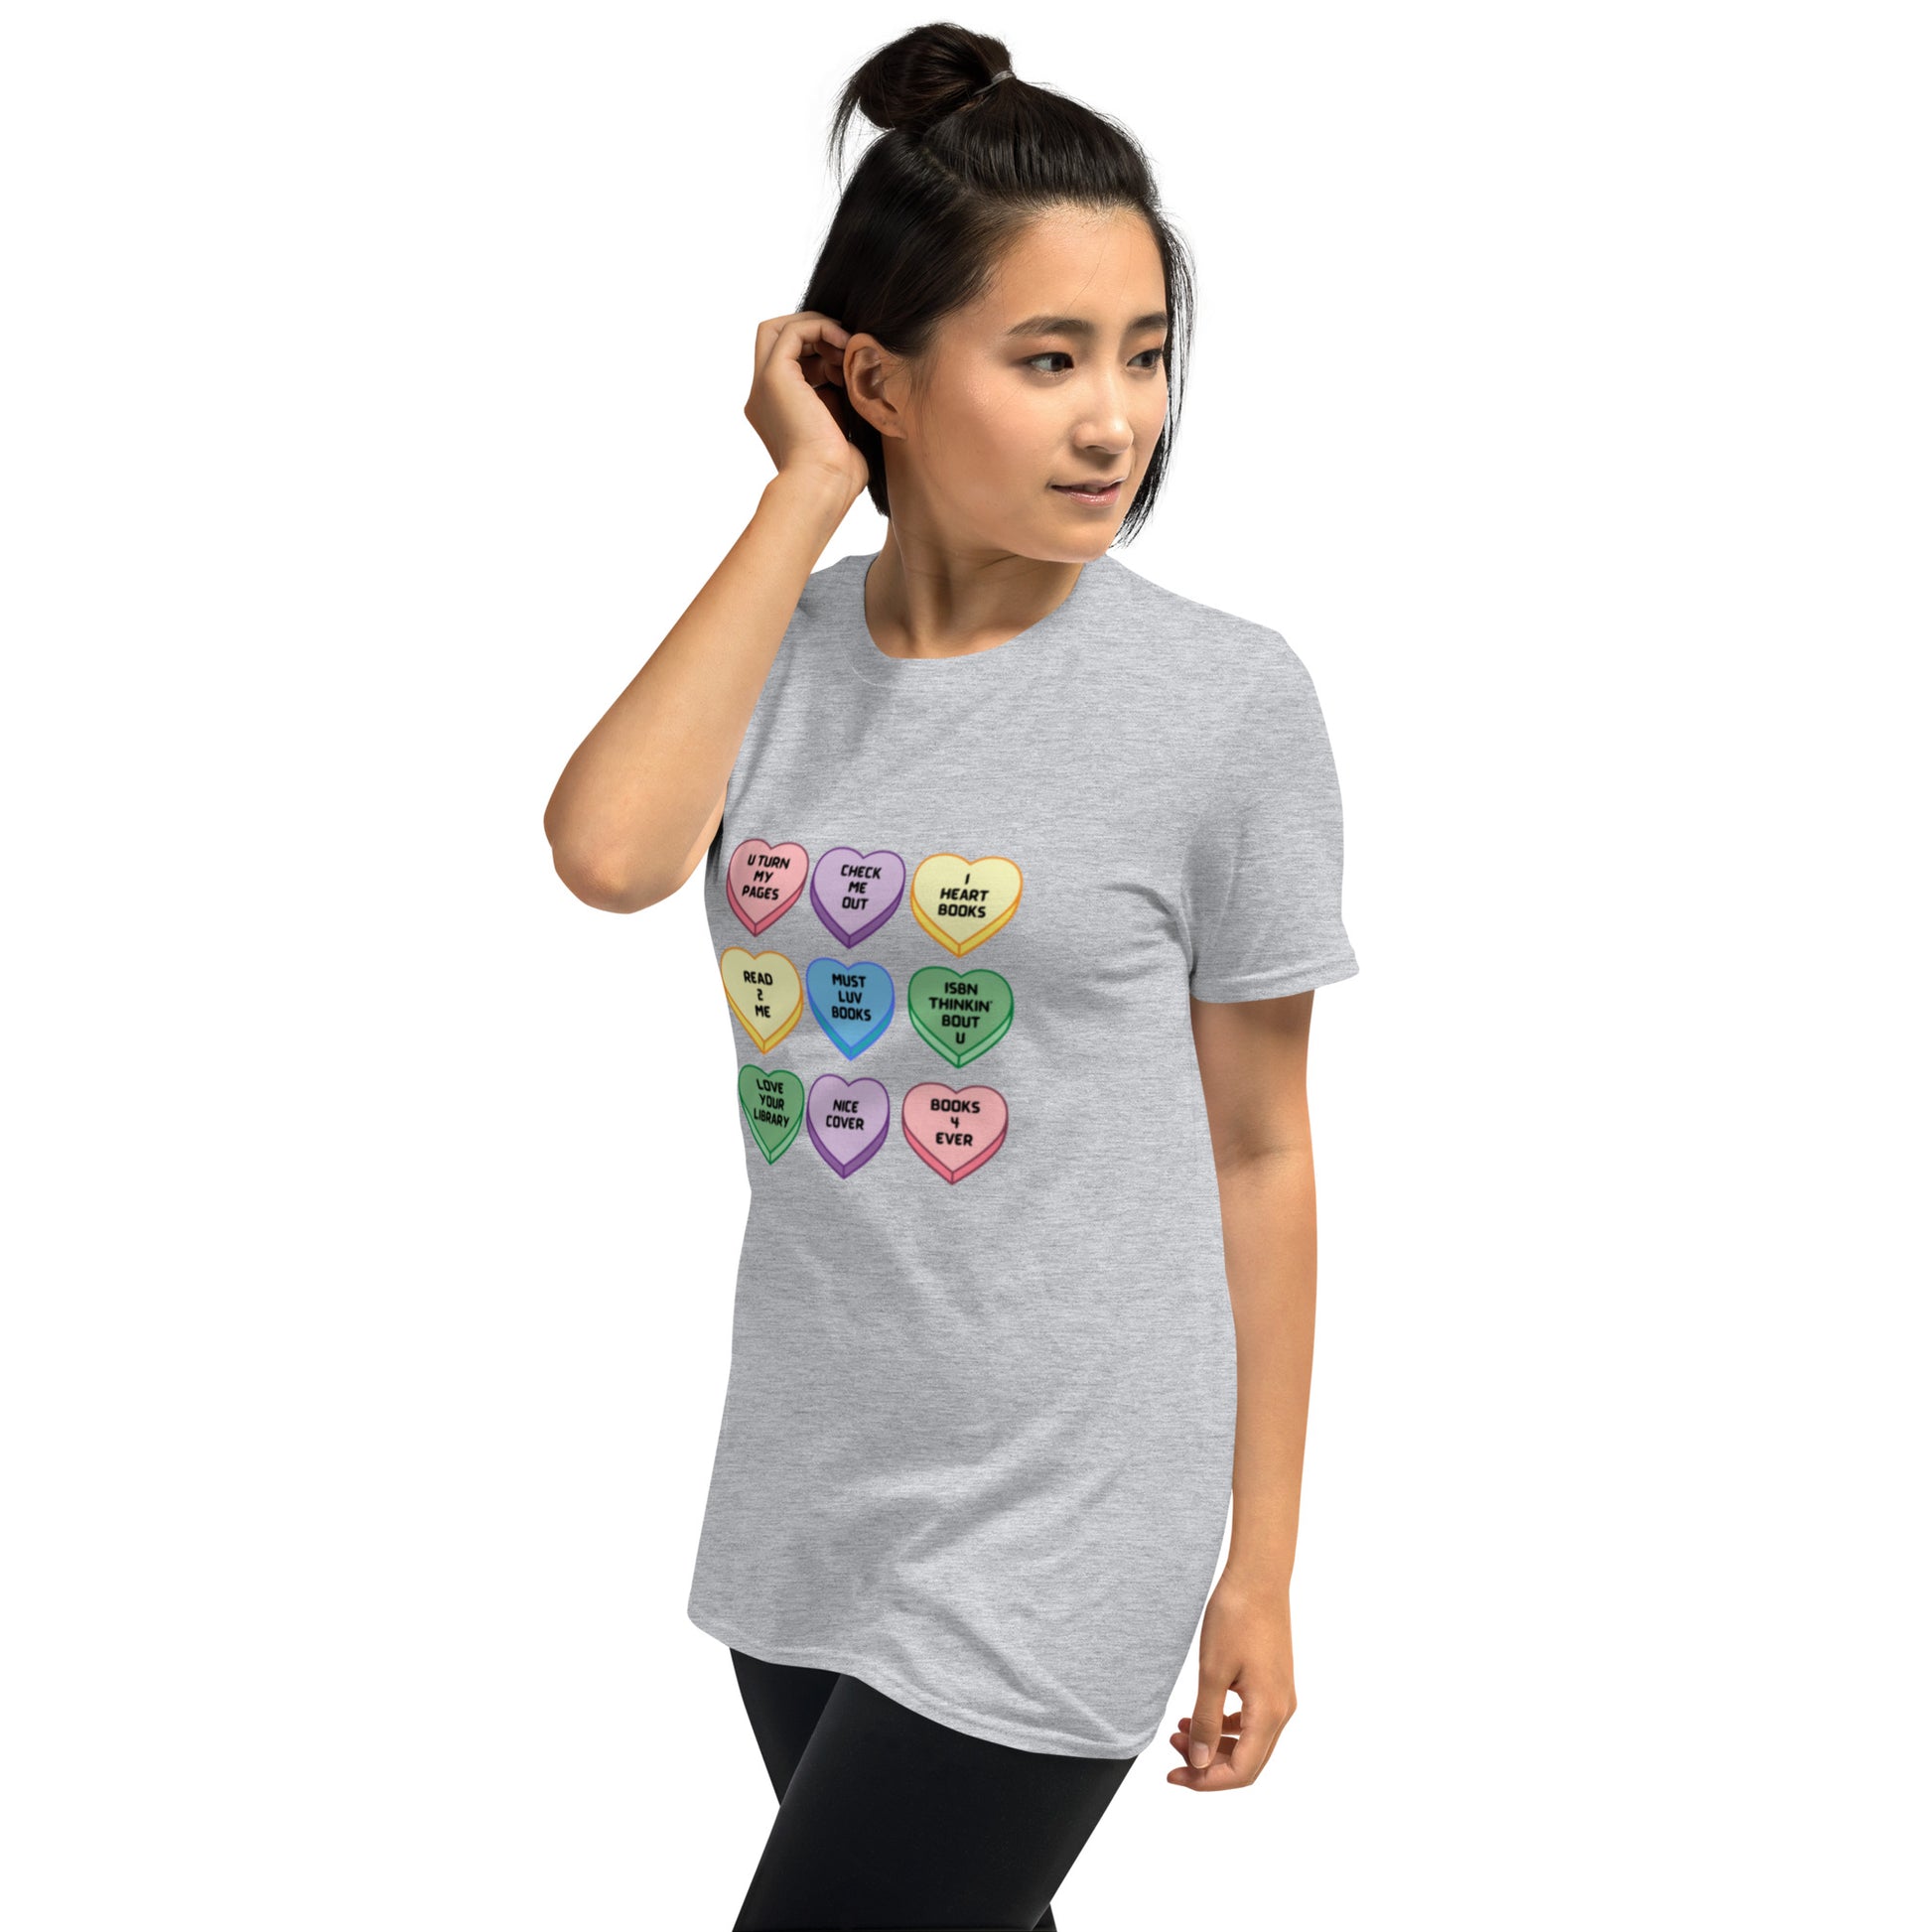 Candy Hearts Short-Sleeve Unisex T-Shirt - The Spinster Librarian Shop